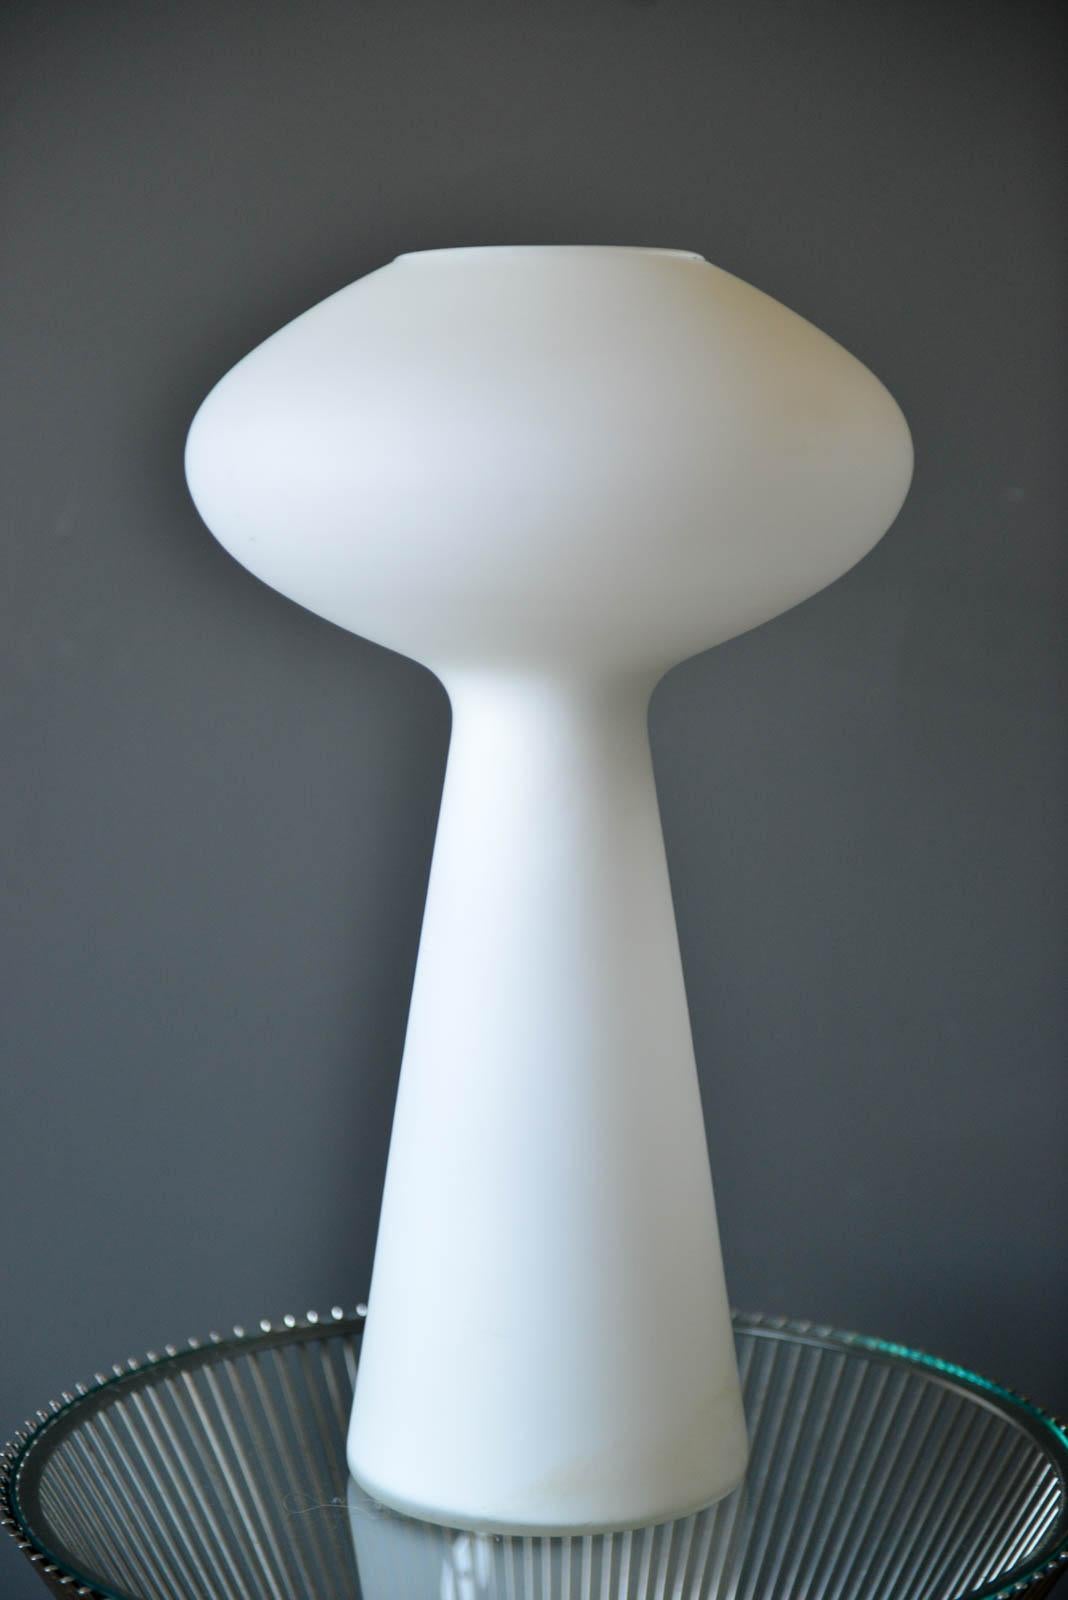 Opaque blown glass lamp by Lisa Johansson-Pape of Finland. A stunning table lamp designed by Lisa Johansson-Pape of Finland in 1960. Beautiful frosted opaque glass in a lovely soft mushroom shape. Emits beautiful soft light, looks amazing on your